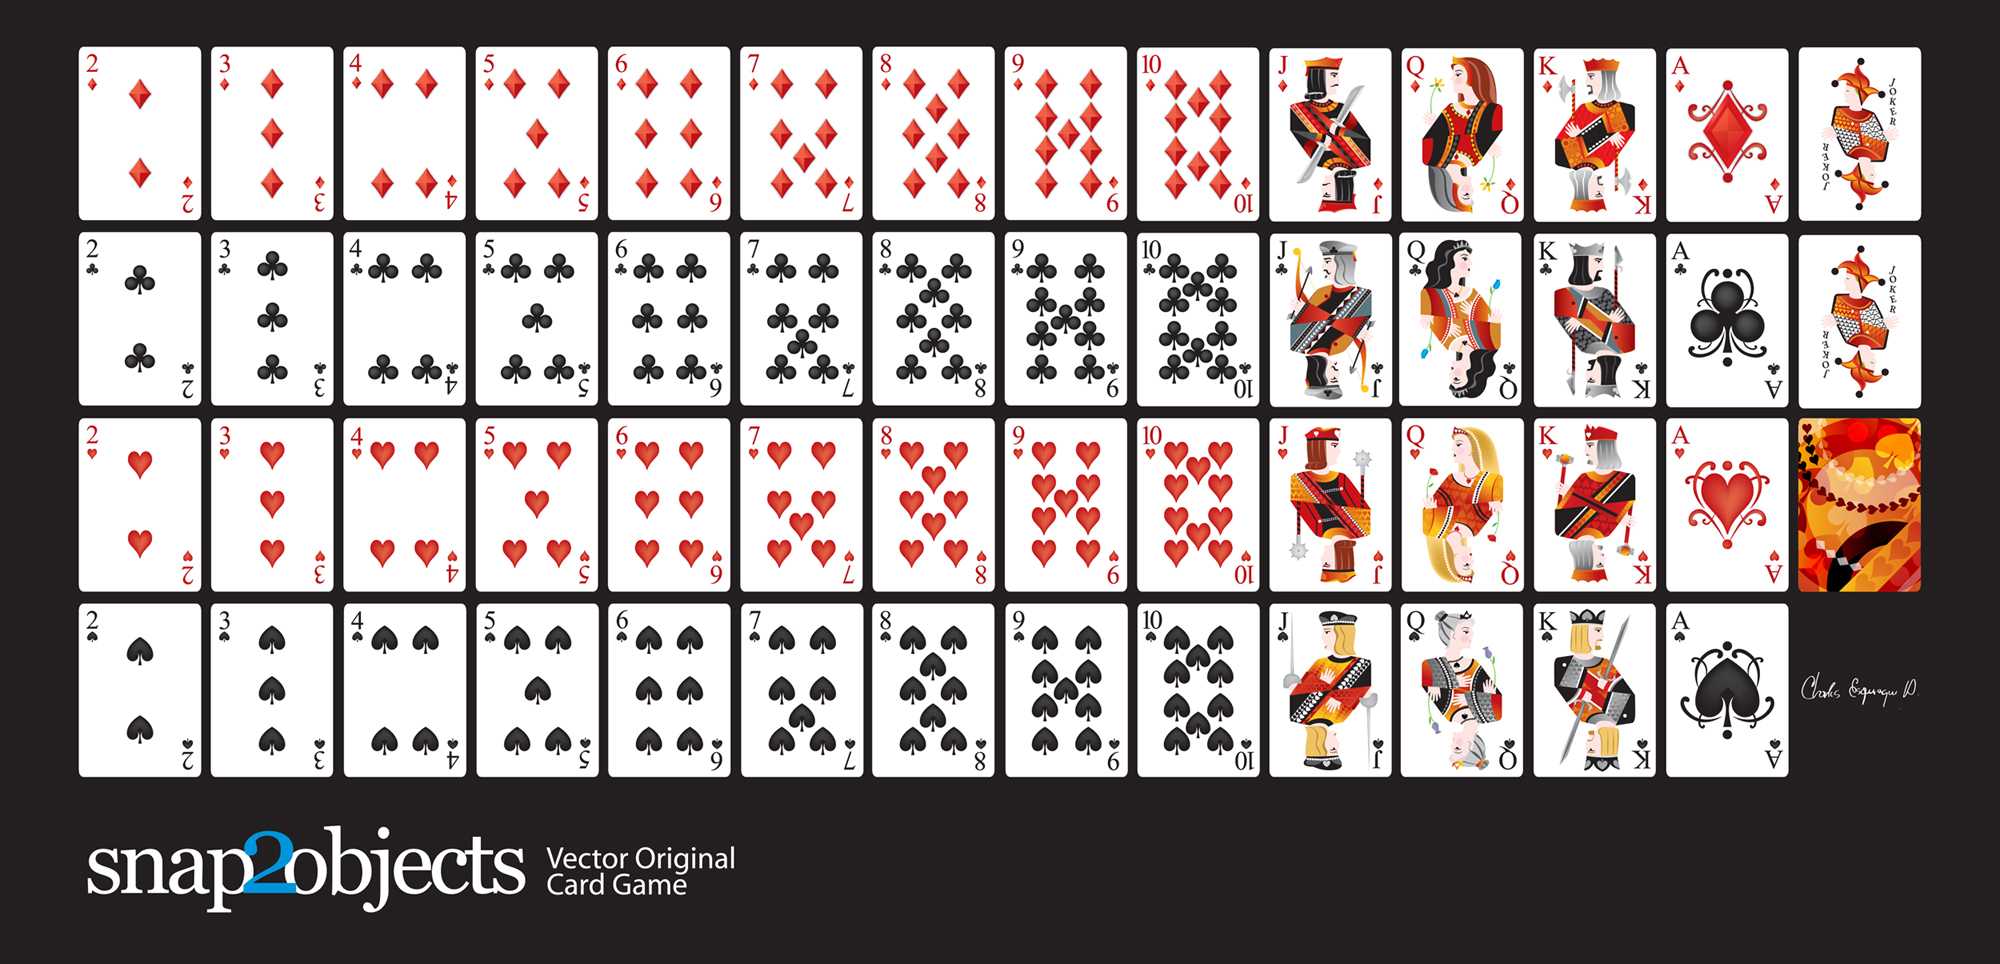 Playing Card Vector Art At Getdrawings | Free Download Throughout Playing Card Design Template